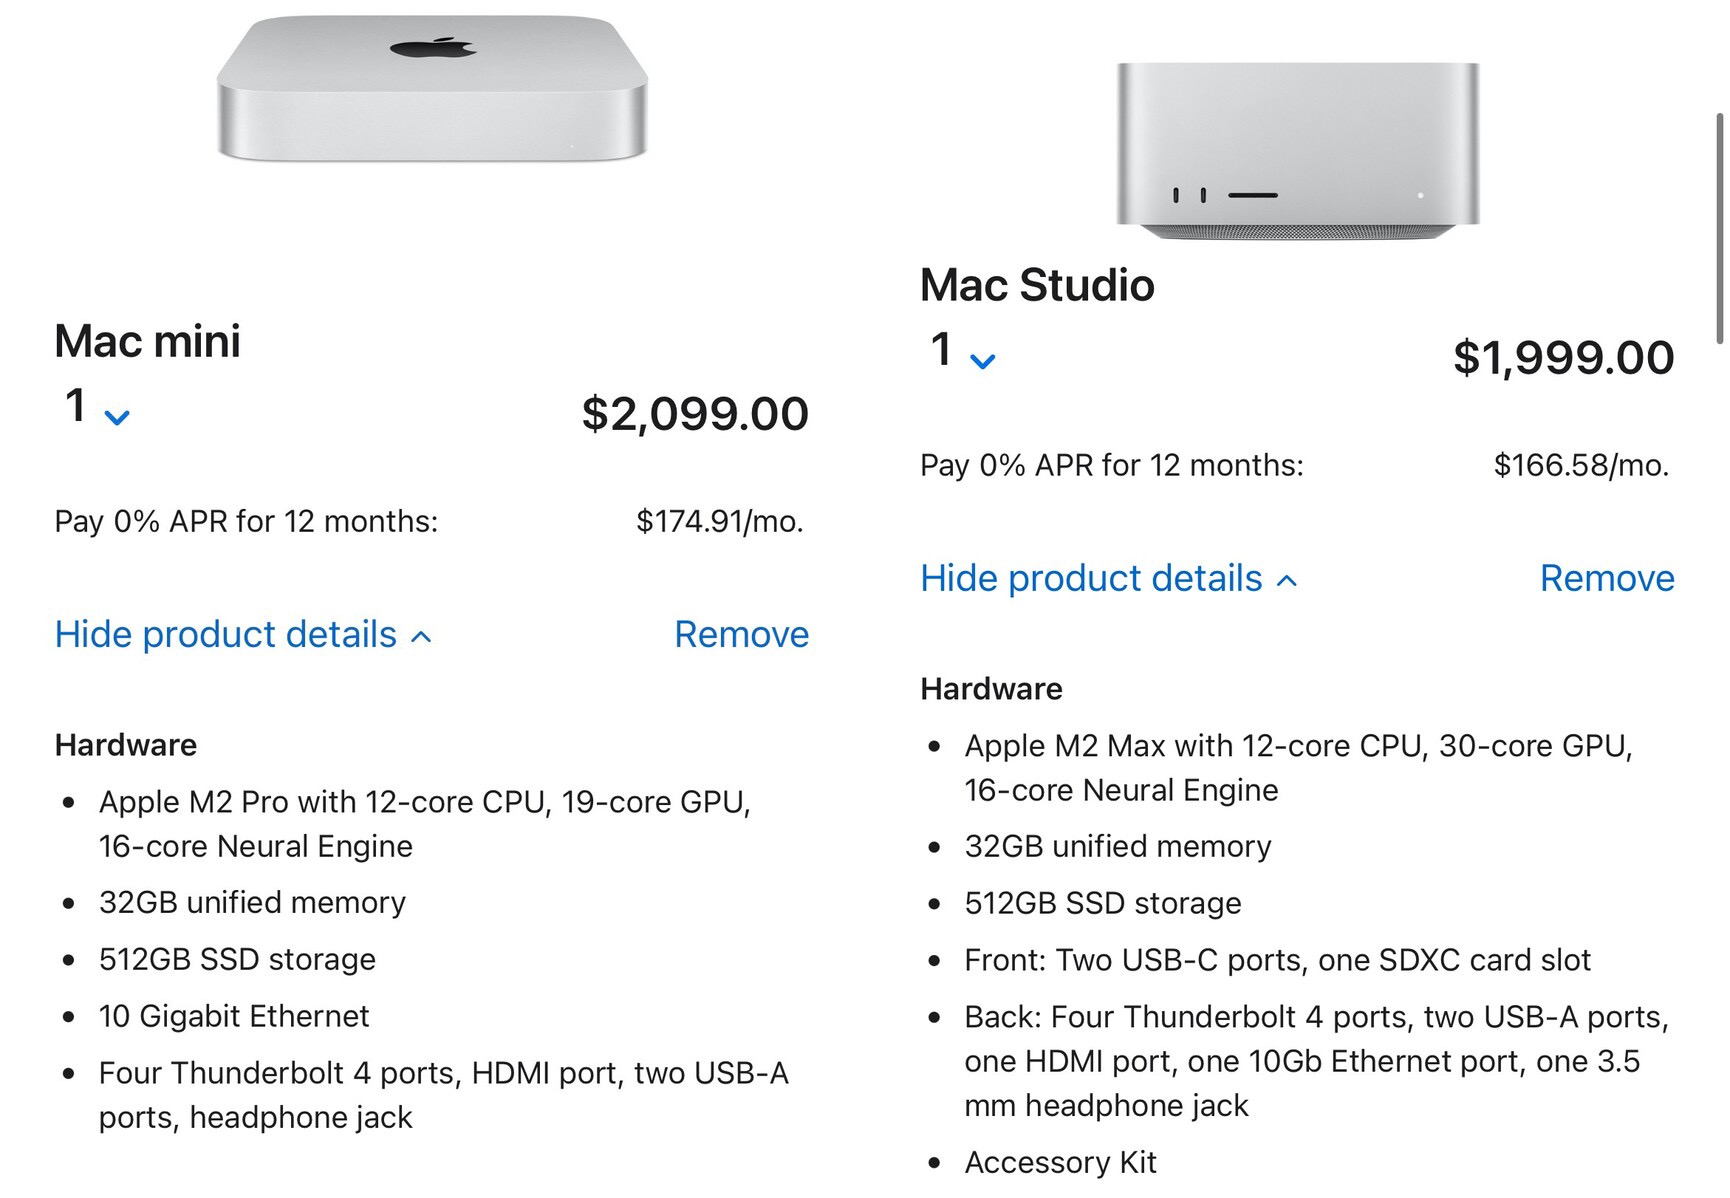 A Mac mini at $2099 with lesser specs compared to a Mac Studio at $1999.